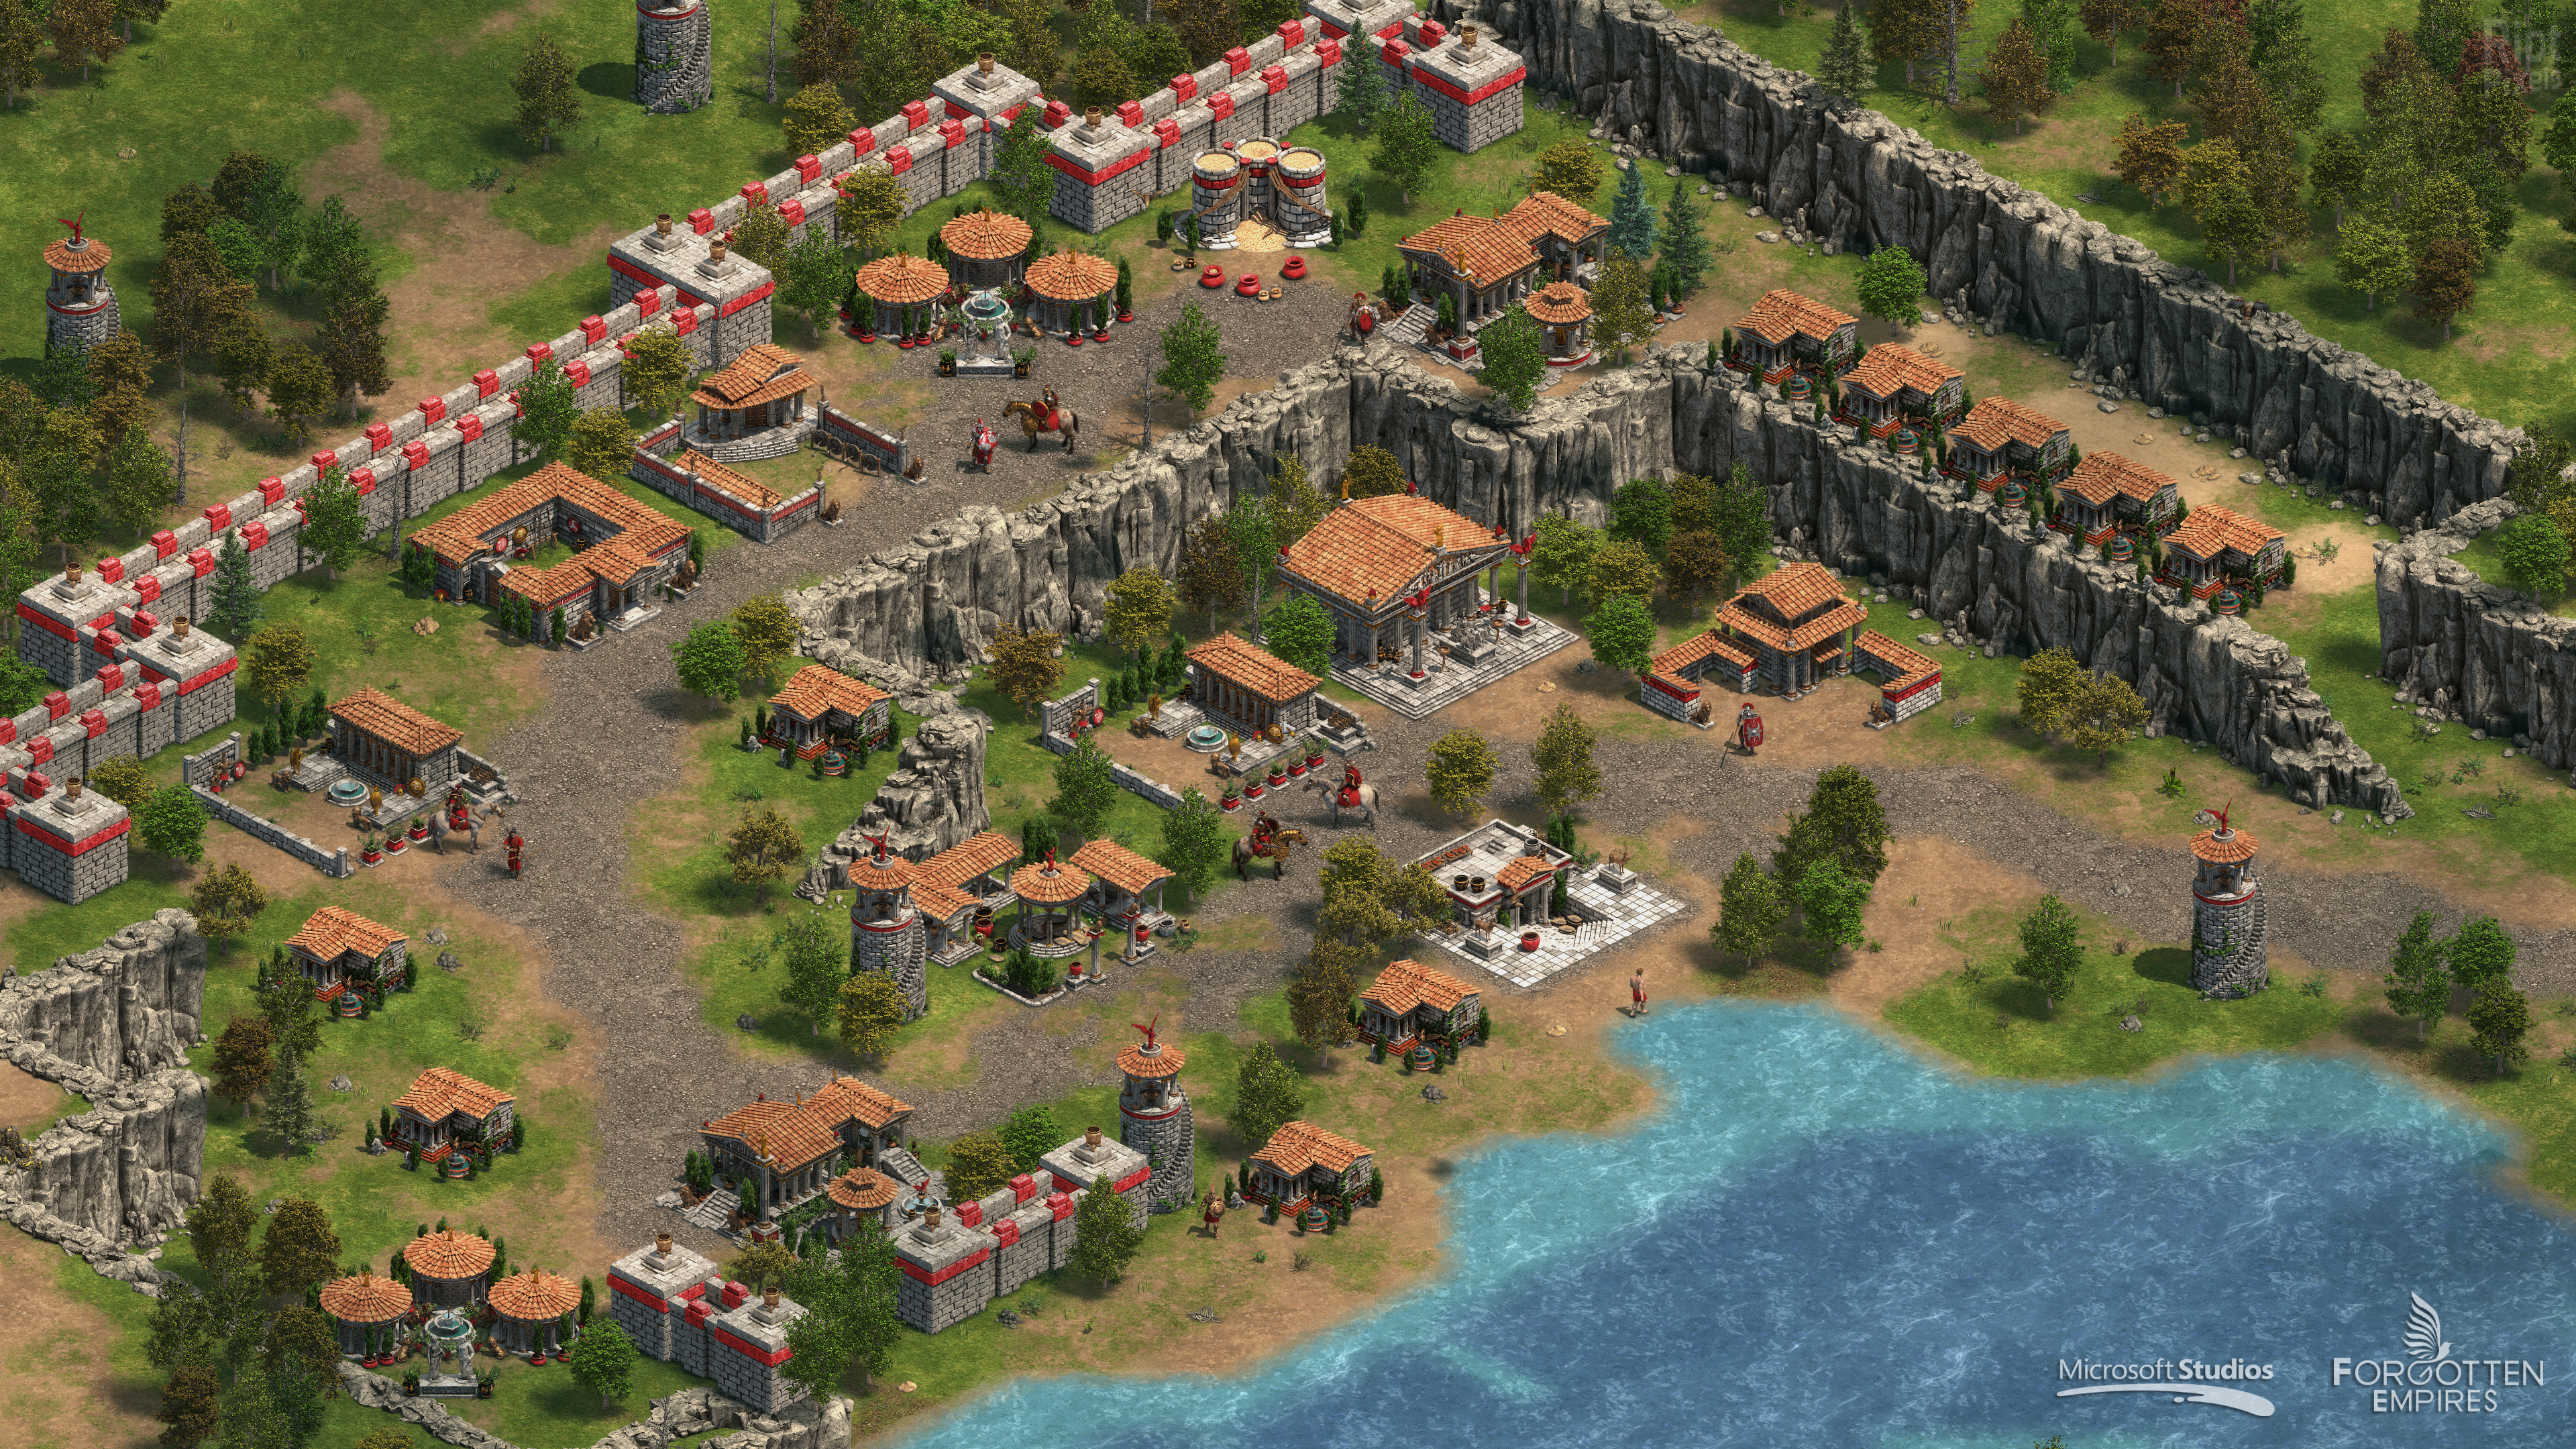 age of empires torrent